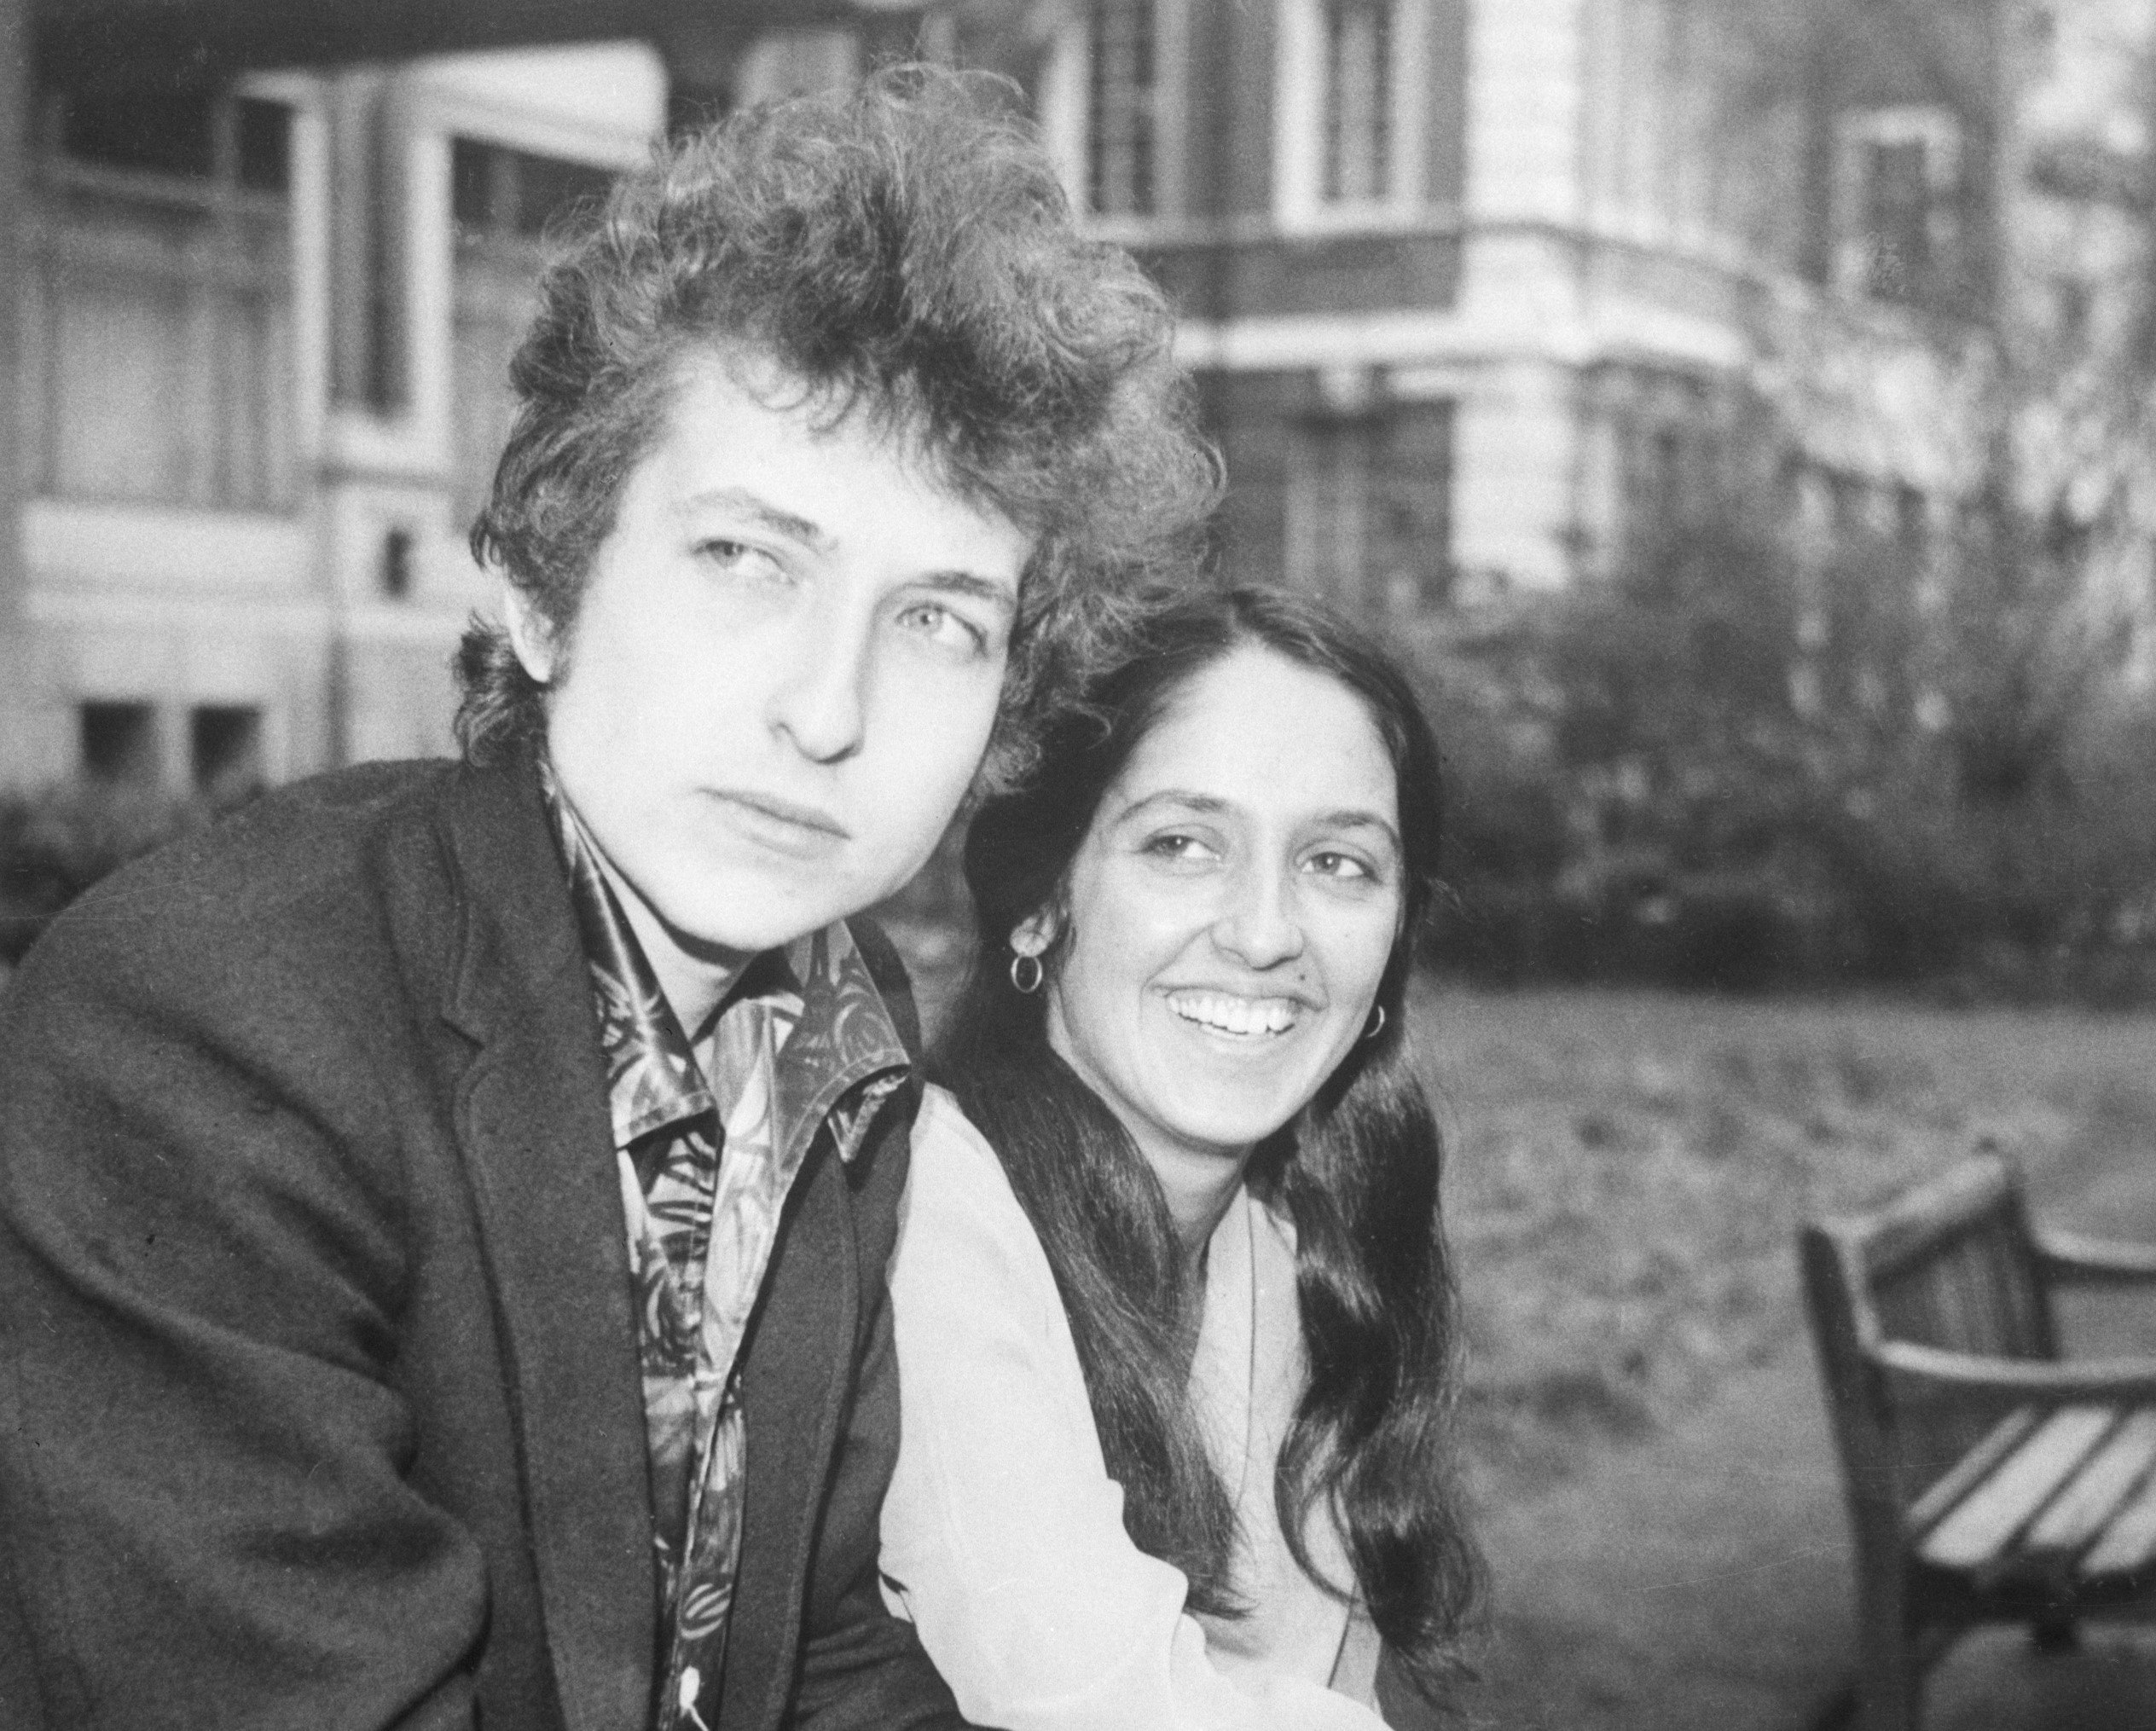 A black and white picture of Bob Dylan and Joan Baez sitting on a bench together. 